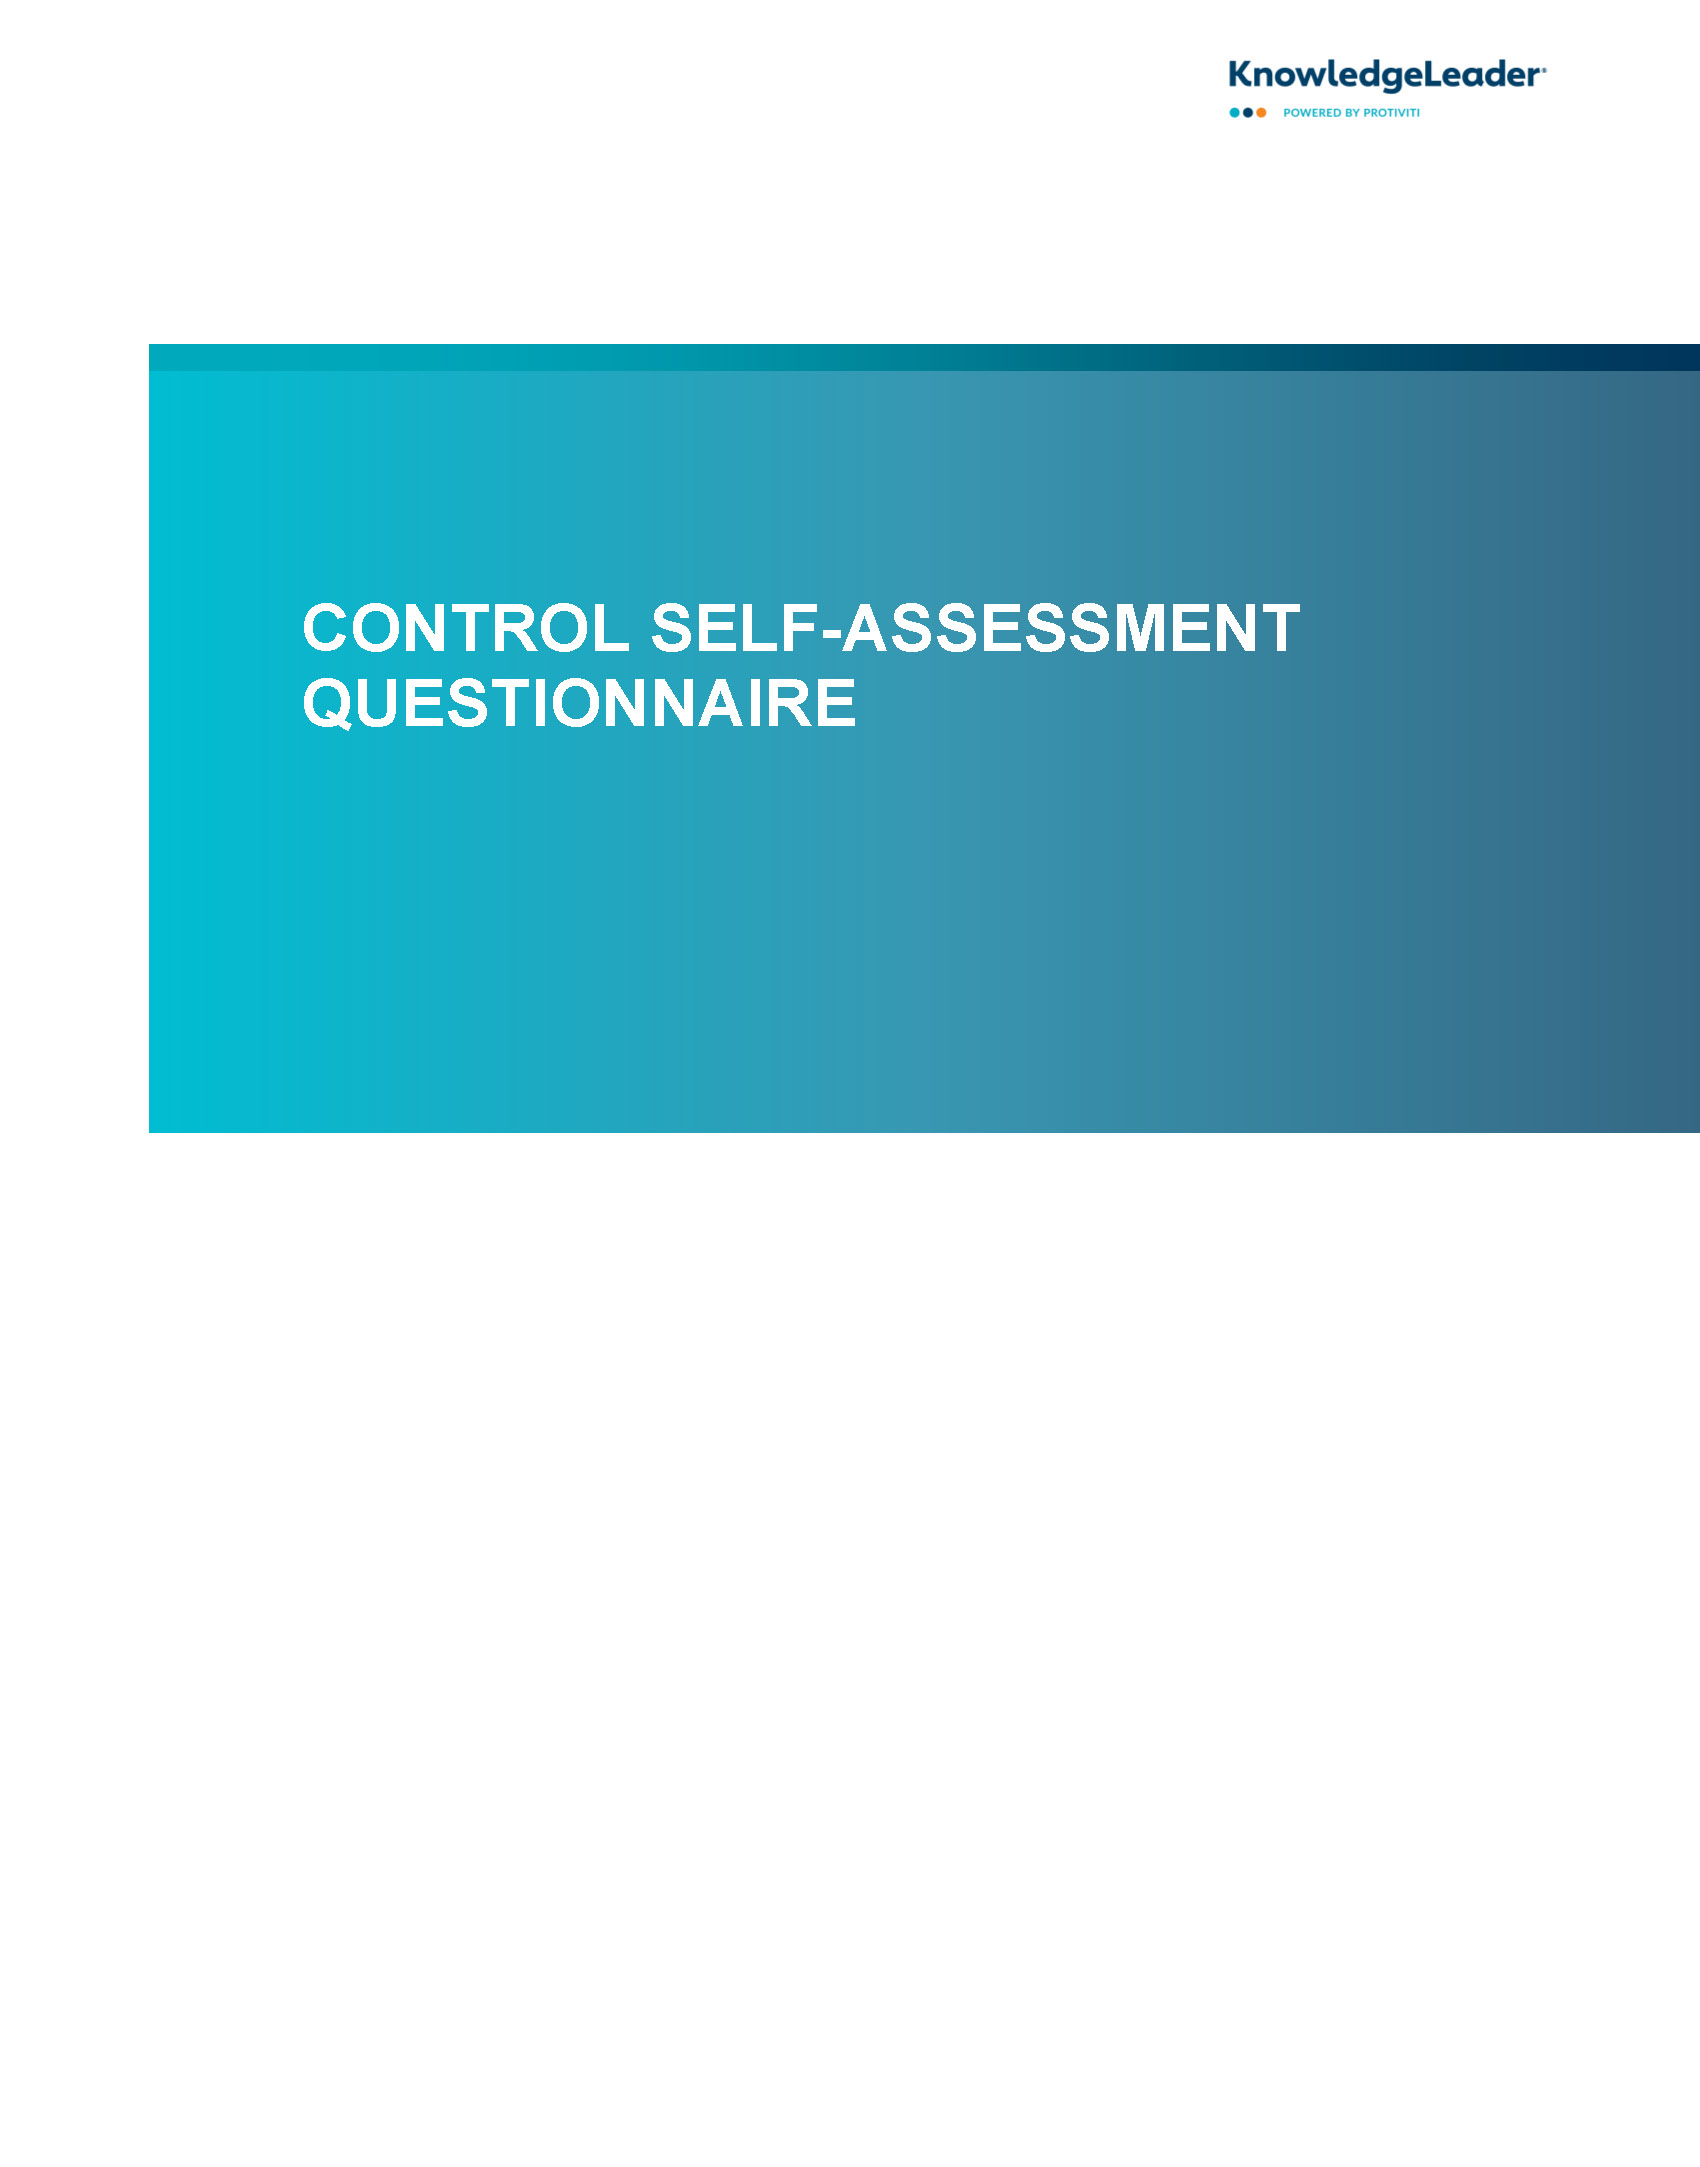 Screenshot of the first page of Control Self-Assessment Questionnaire